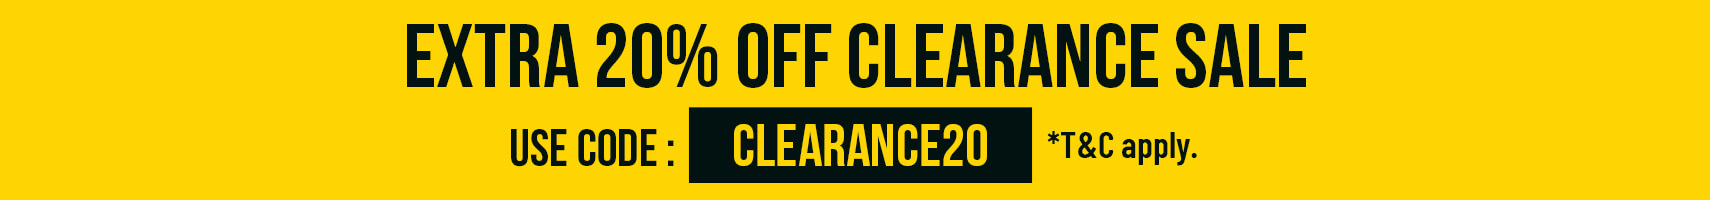 Extra 20% Off Clearance Sale